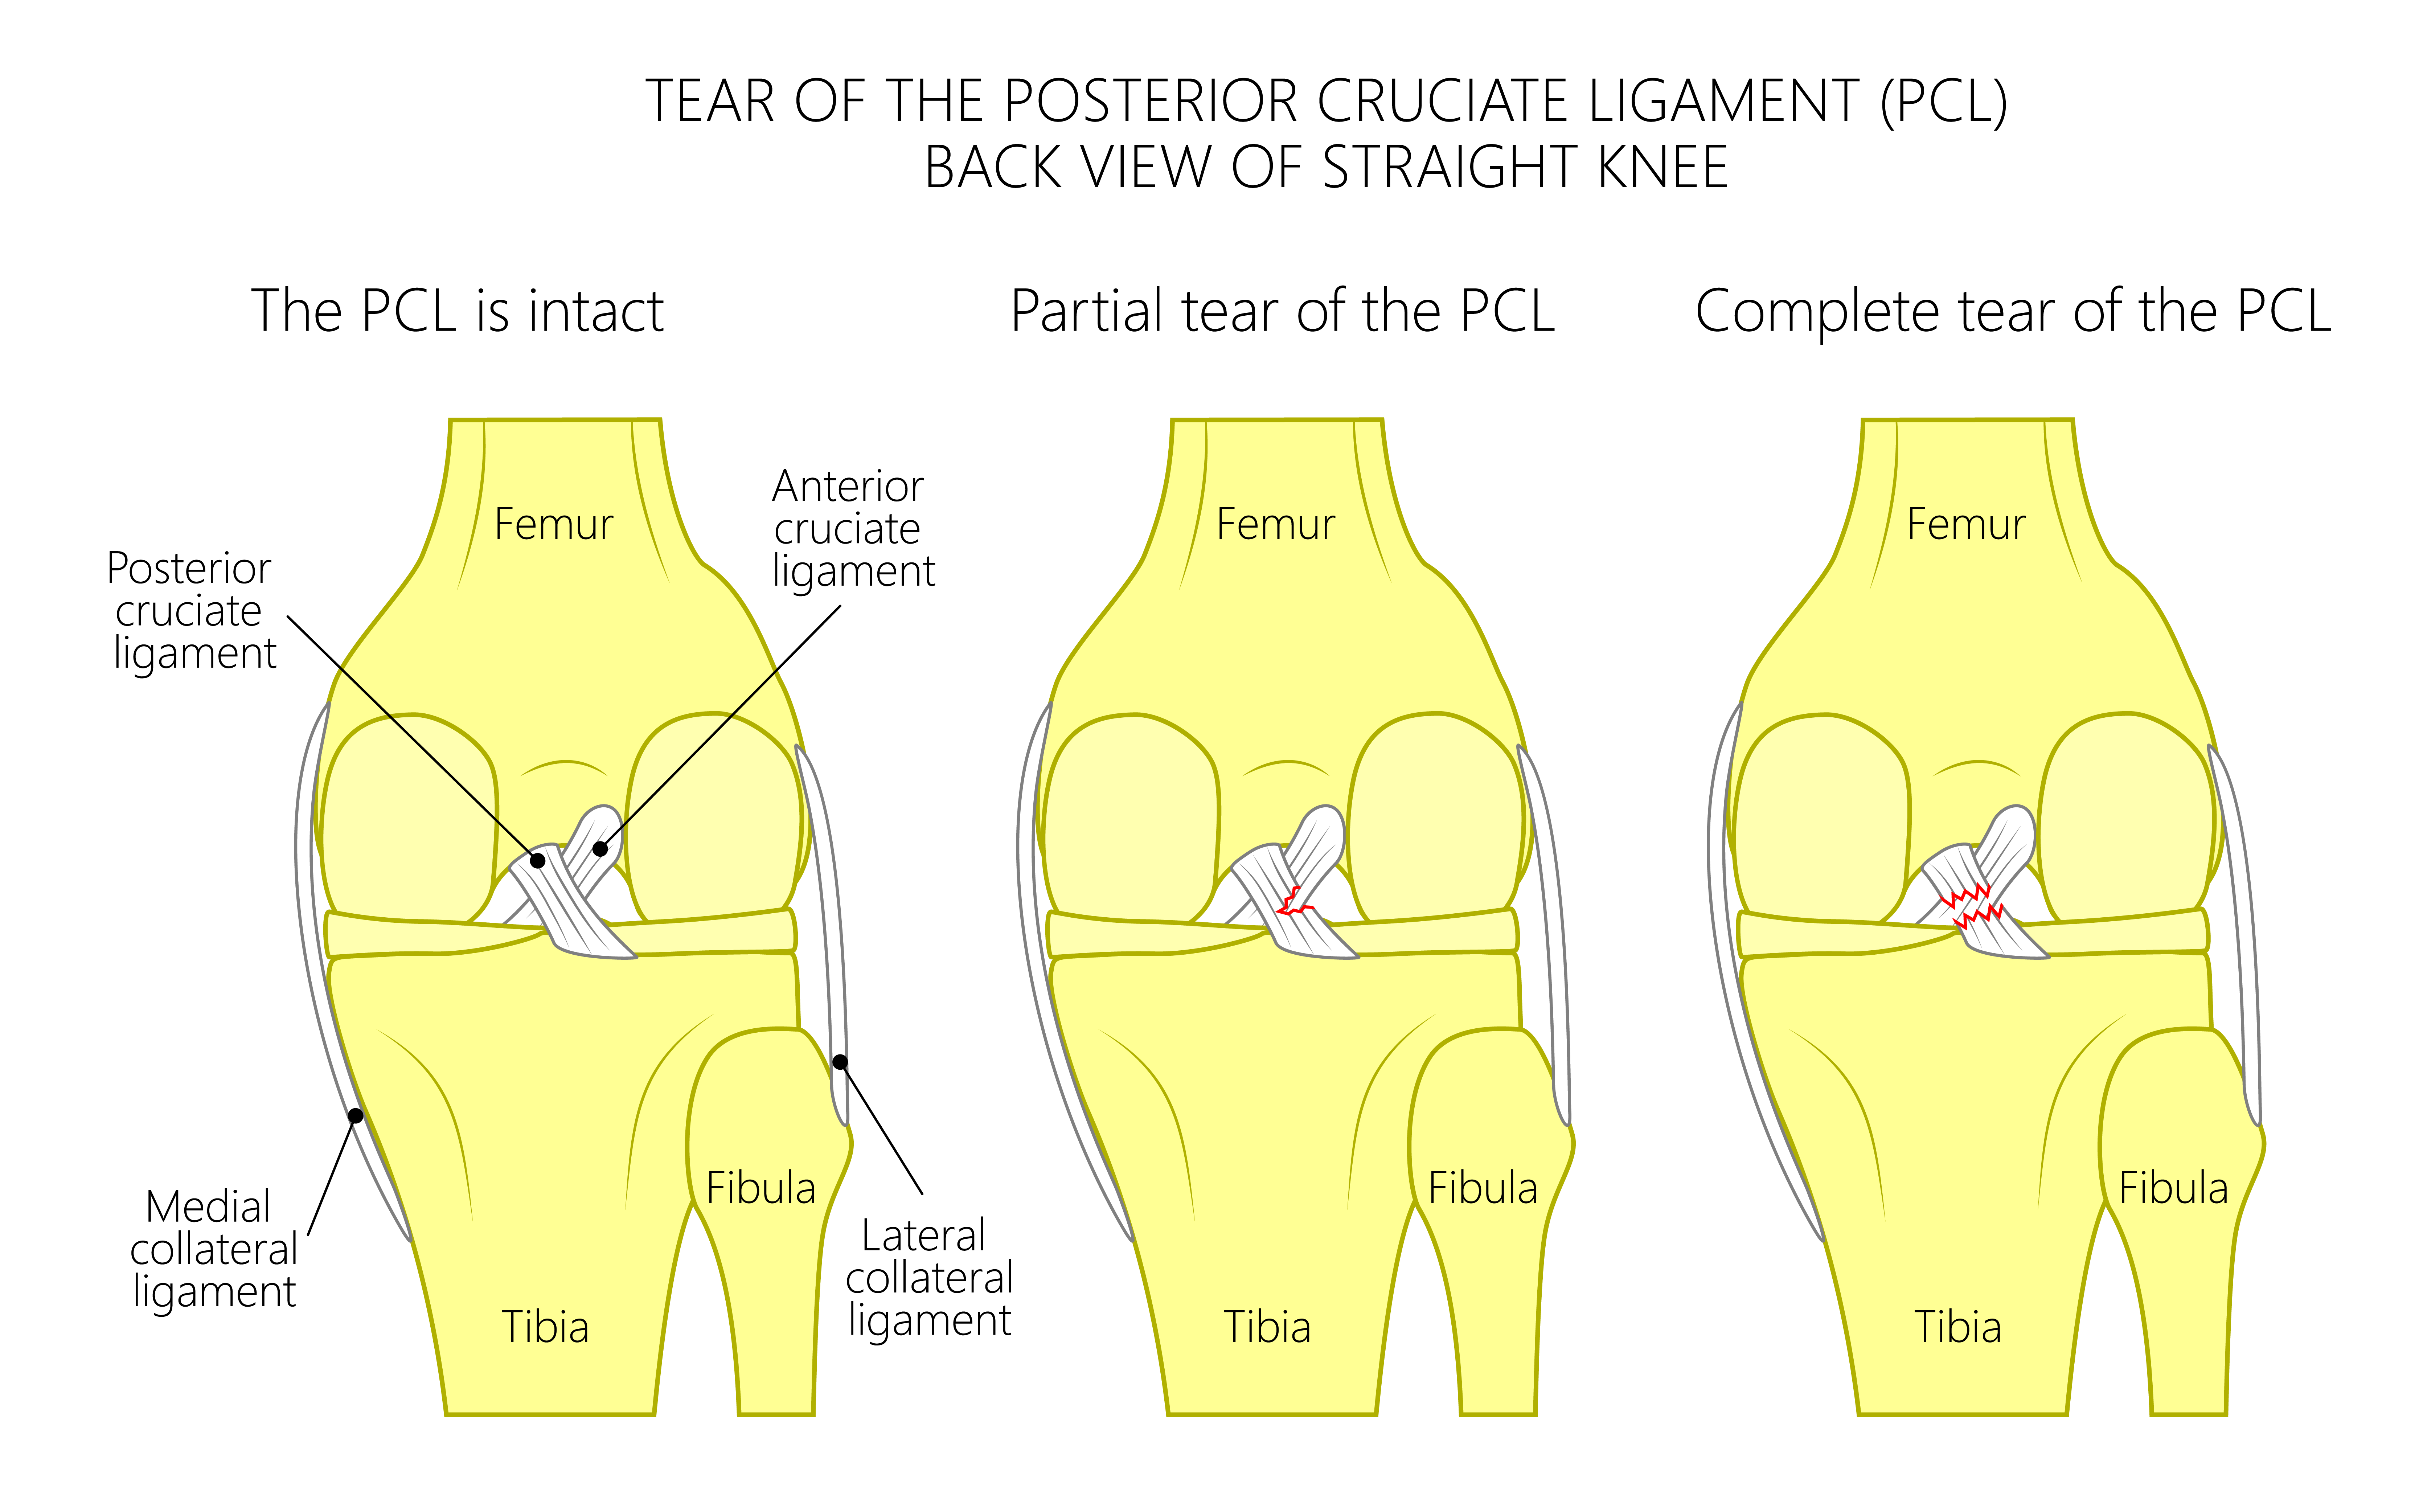 https://www.athletico.com/wp-content/uploads/2019/10/Vector-illustration-of-a-healthy-knee-joint-with-intact-partial-tear-of-anterior-cruciate-ligament-and-complete-tear-of-ACL-Converted.png